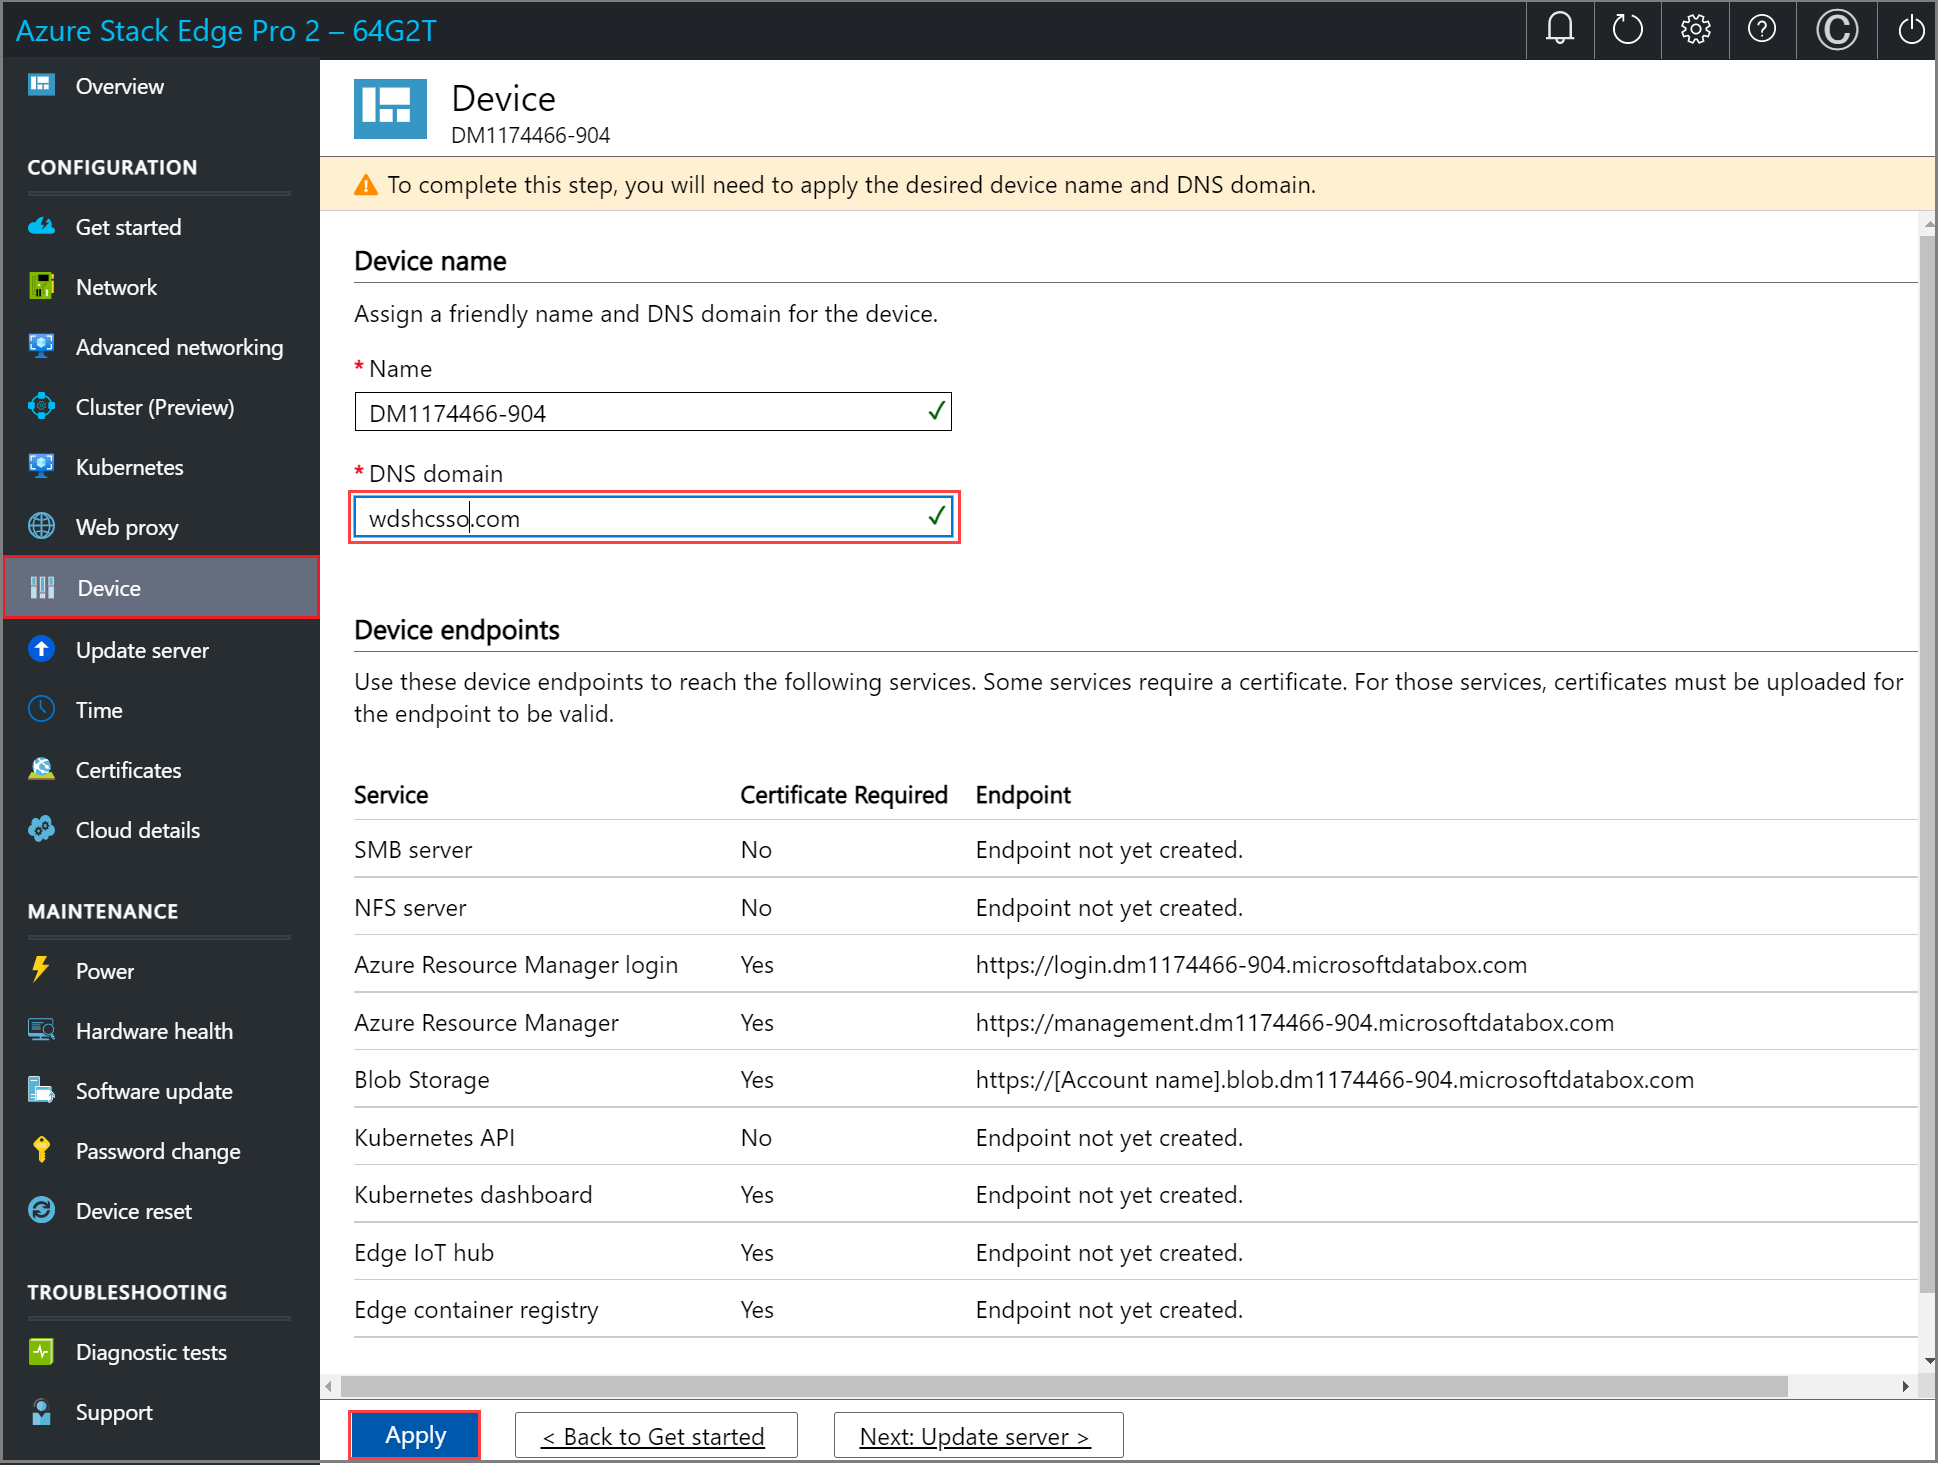 Screenshot of the Device page in the local web UI of an Azure Stack Edge device. The Apply button is highlighted.